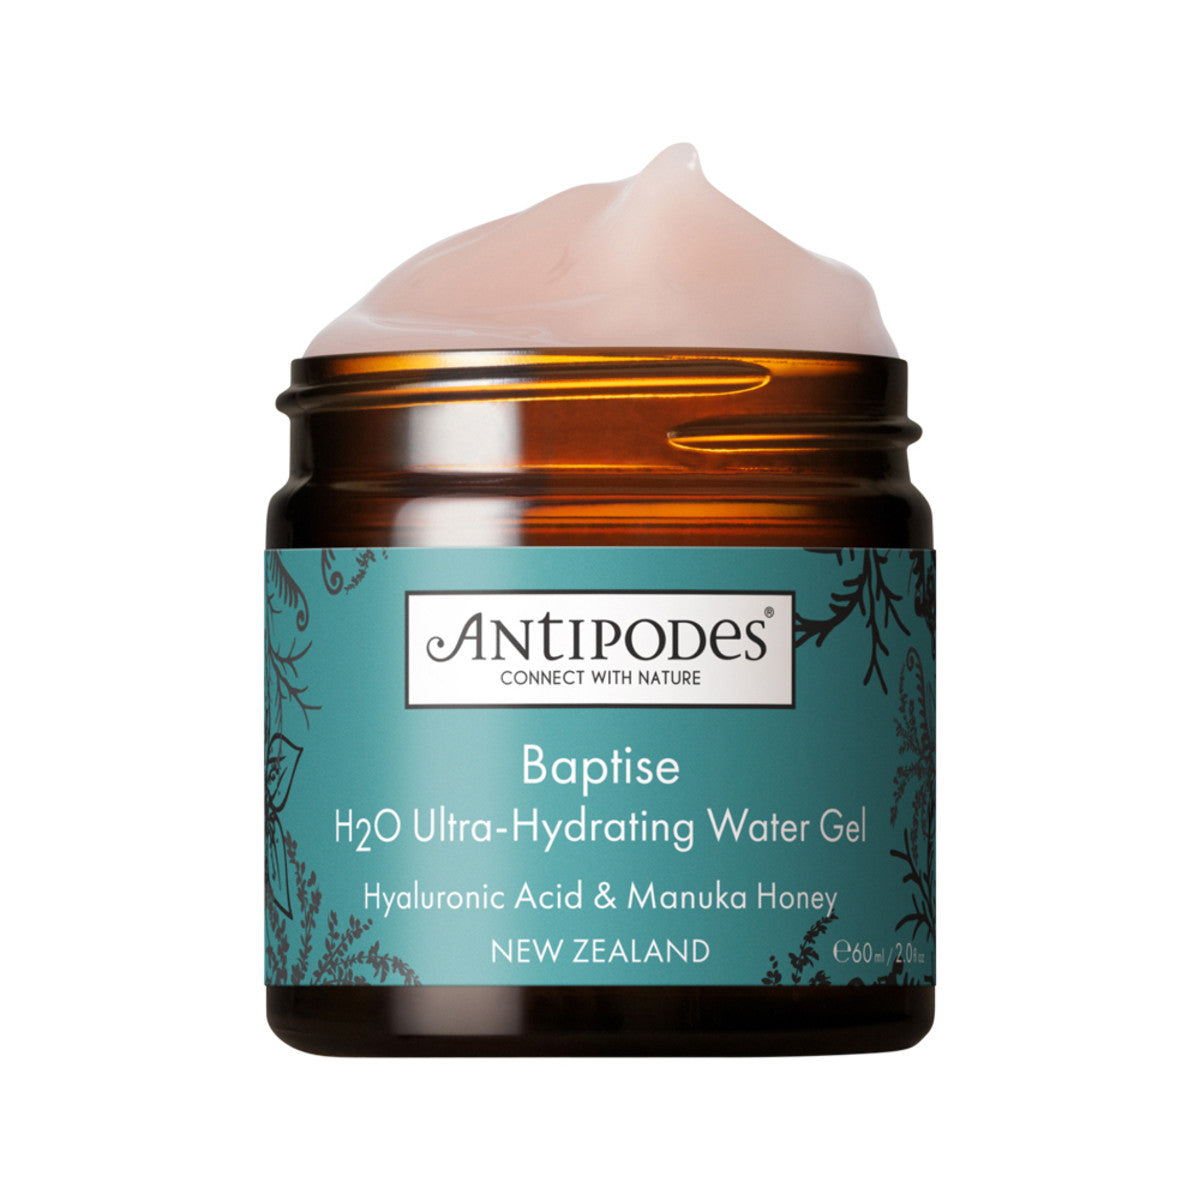 Antipodes - Water Gel Baptise H2O Ultra Hydrating